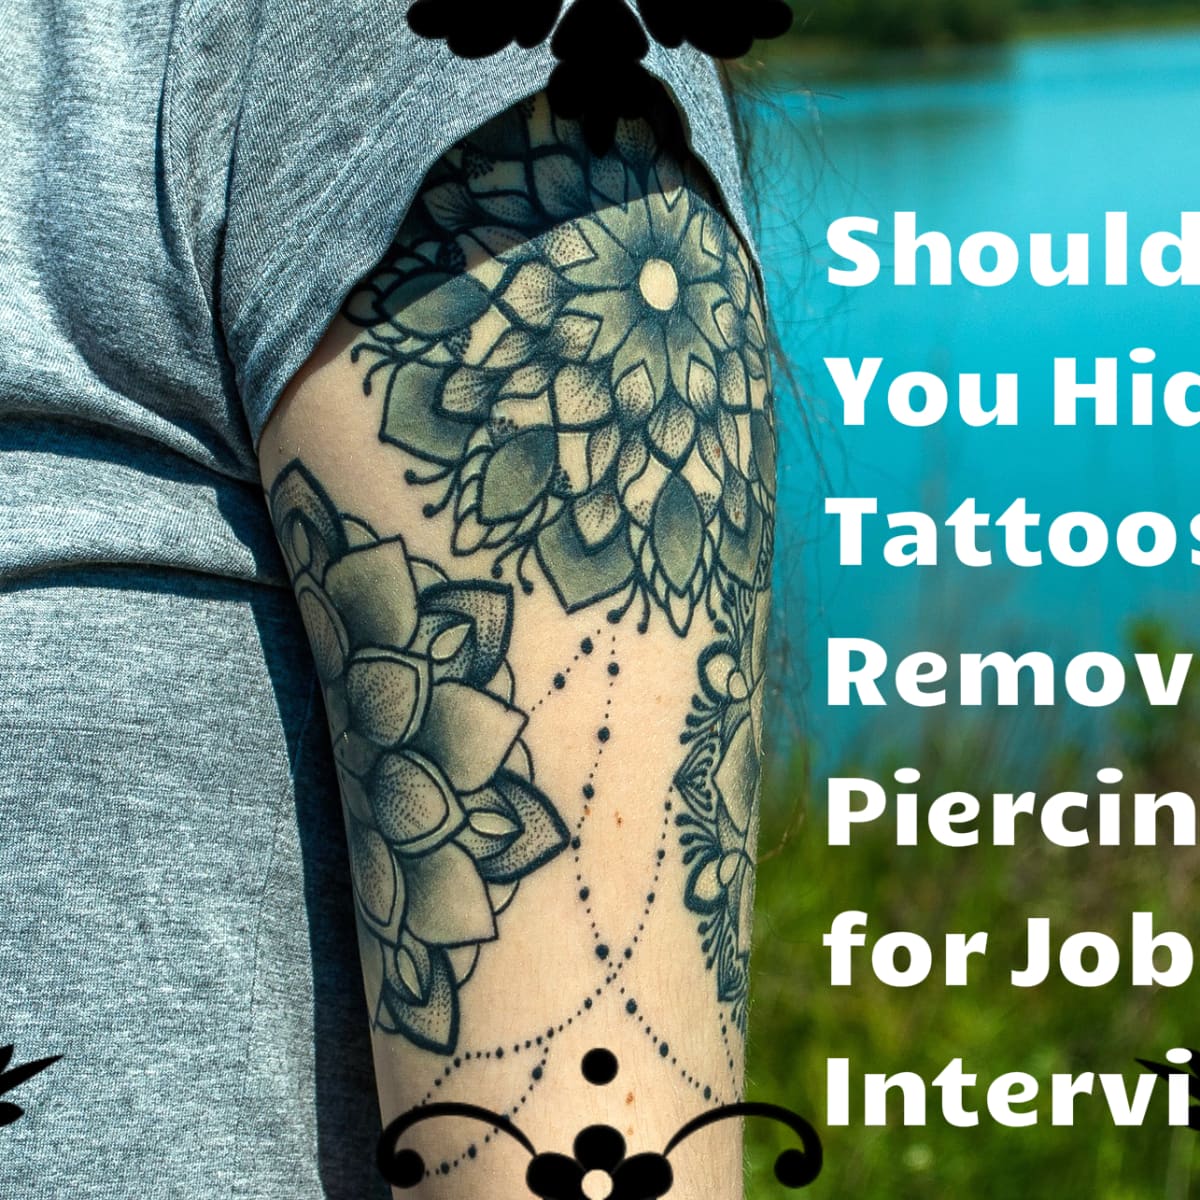 Tattoos and piercings expression or unprofessional  The Signal